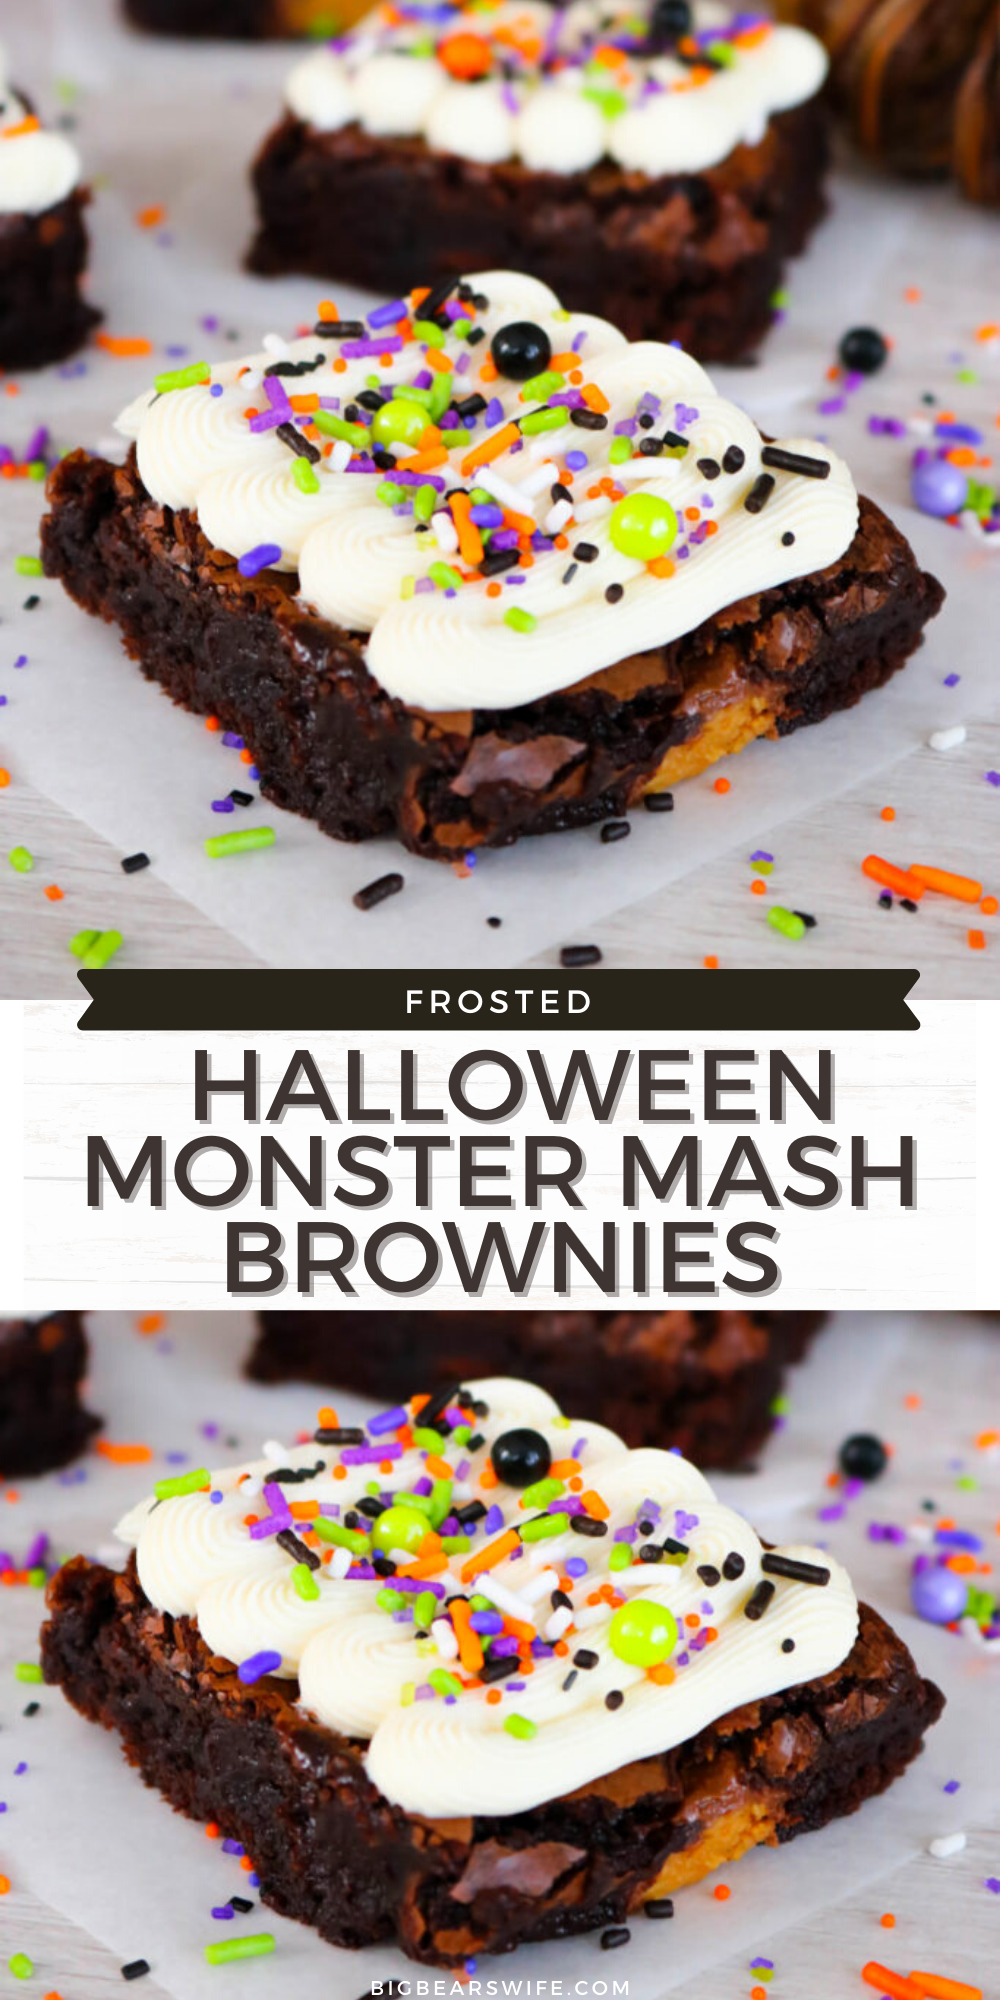 Peanut Butter stuffed brownies are celebrating Halloween with Monster Mash makeover! These Frosted Halloween Monster Mash Brownies have the perfect Halloween sprinkles on top of the easy homemade frosting and creepy gummy eyeballs.  via @bigbearswife